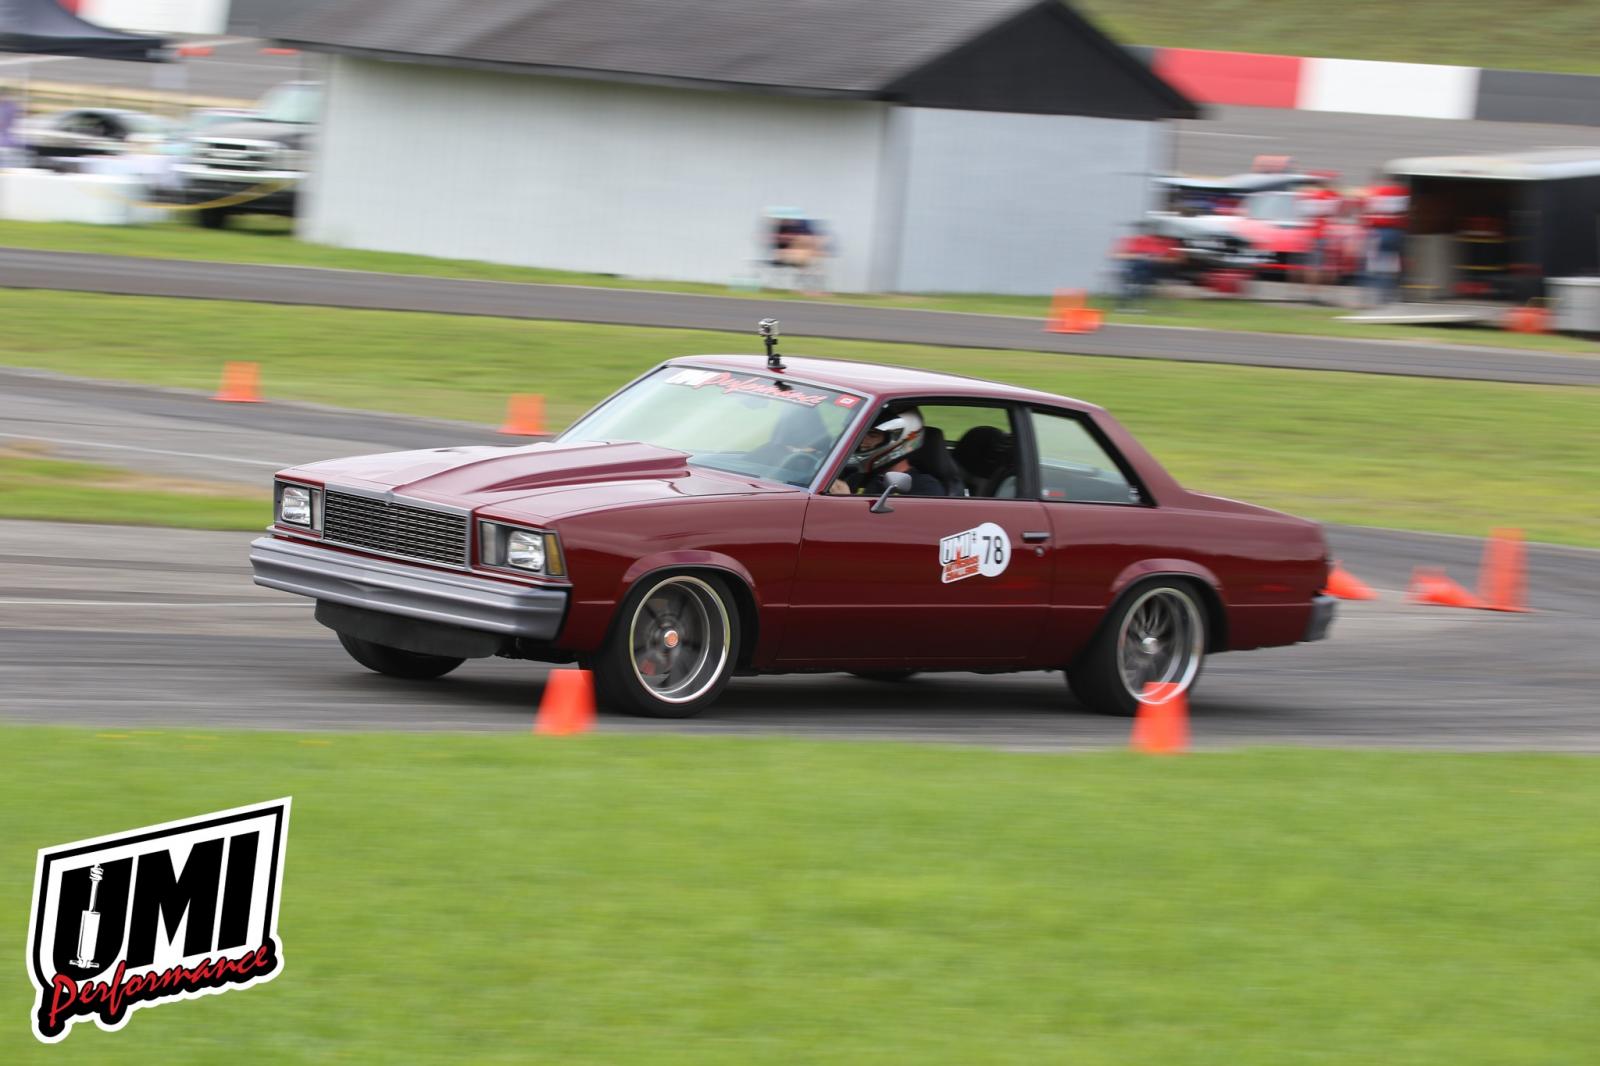 Name:  UMI Autocross and Cruise In 2018 063.jpg
Views: 1004
Size:  150.0 KB